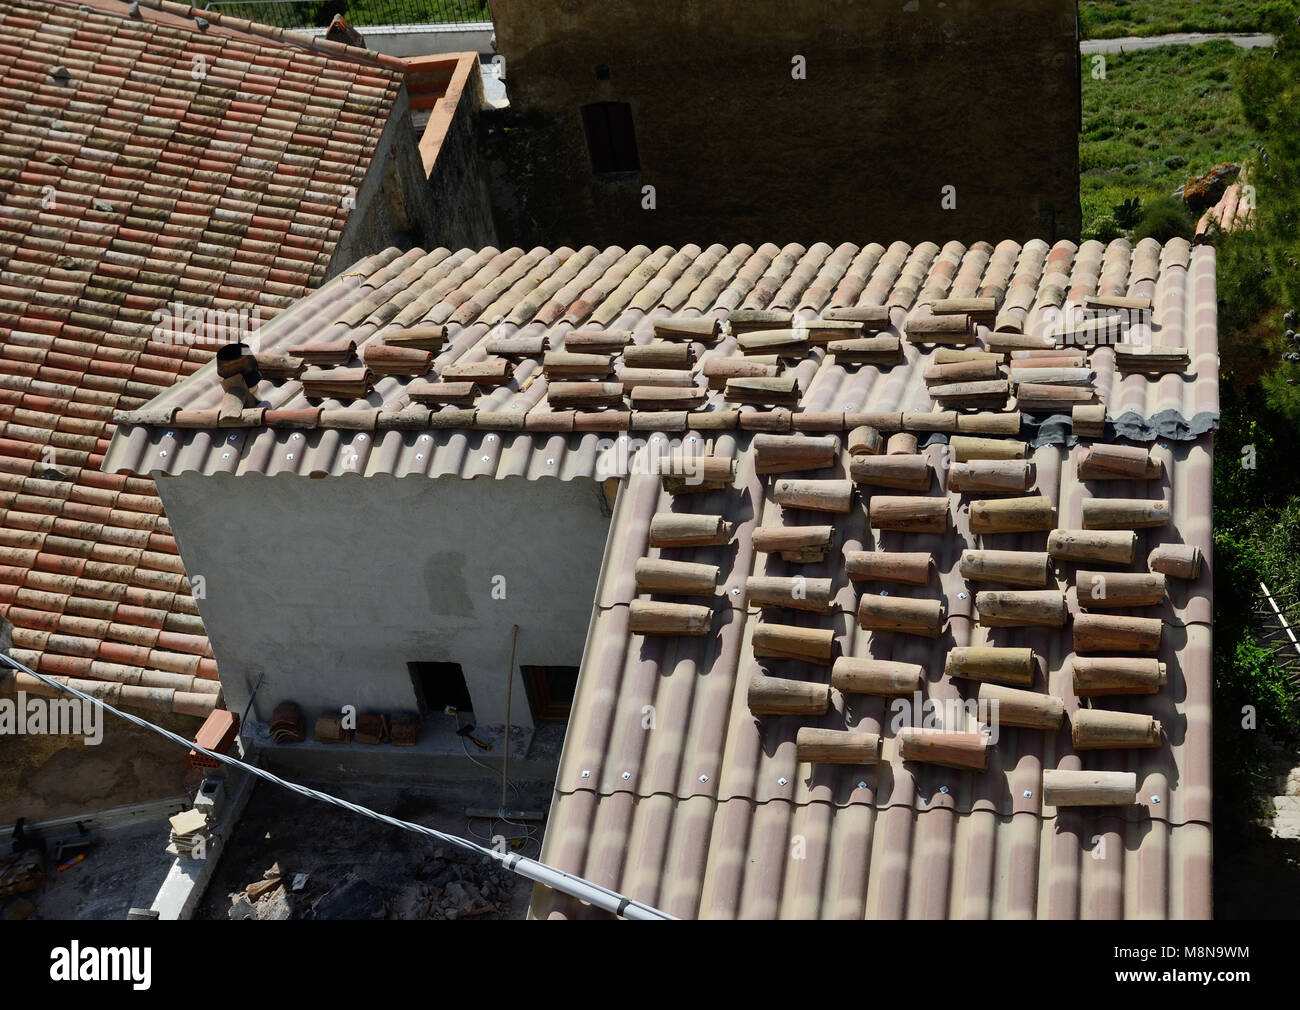 Roofing with the traditional ceramic tiles Stock Photo